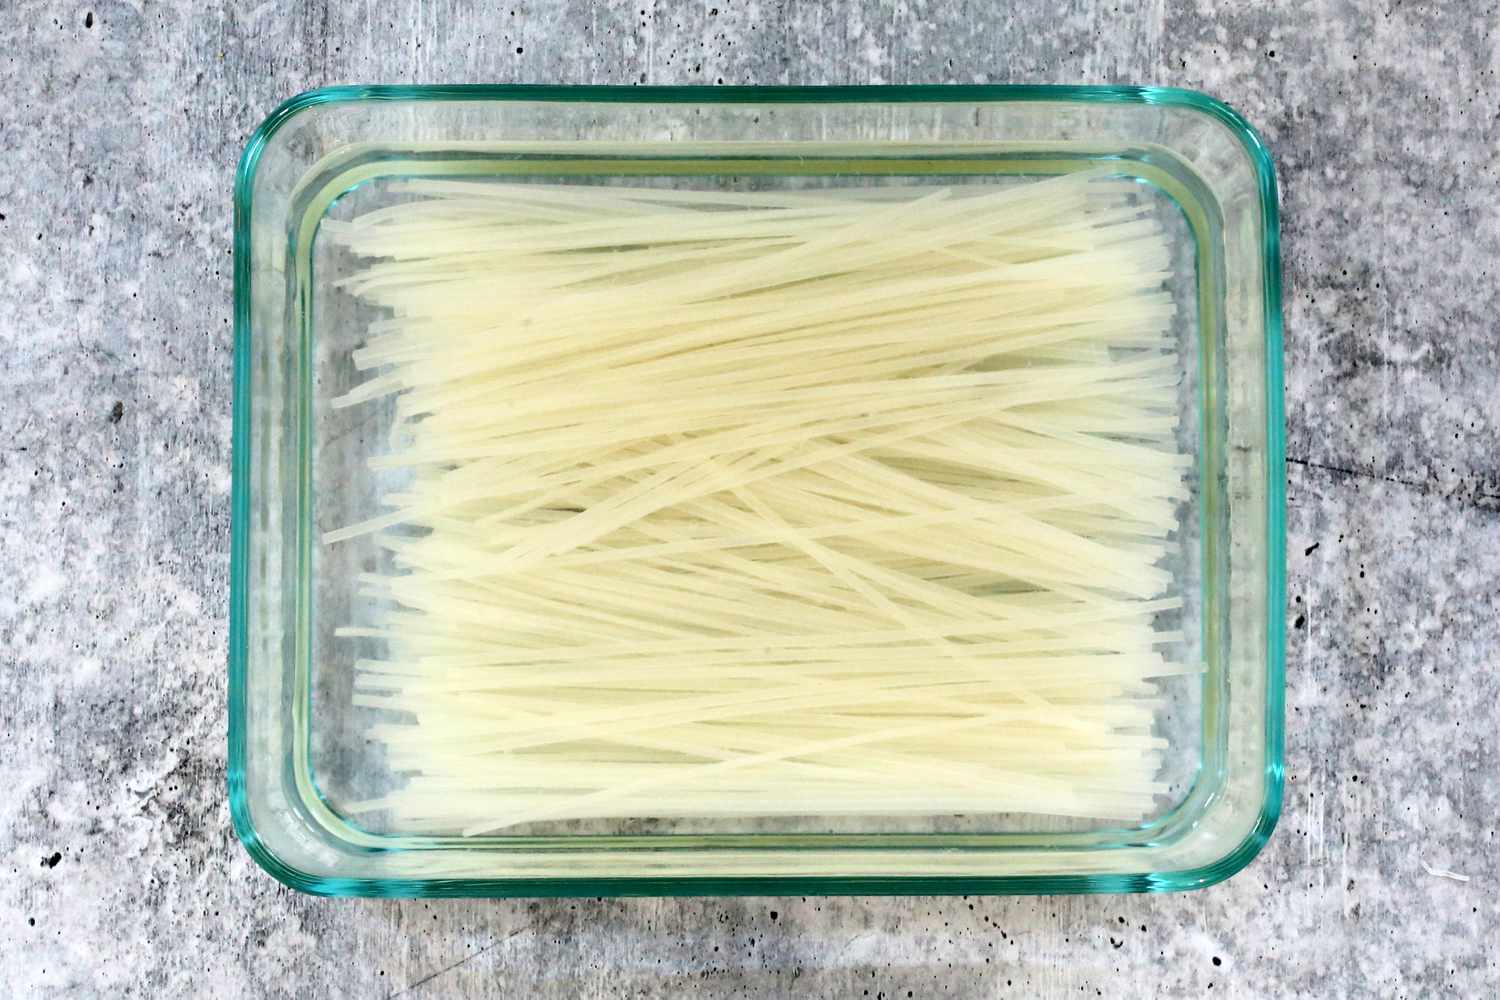 Cook or soak the noodles following the package directions.